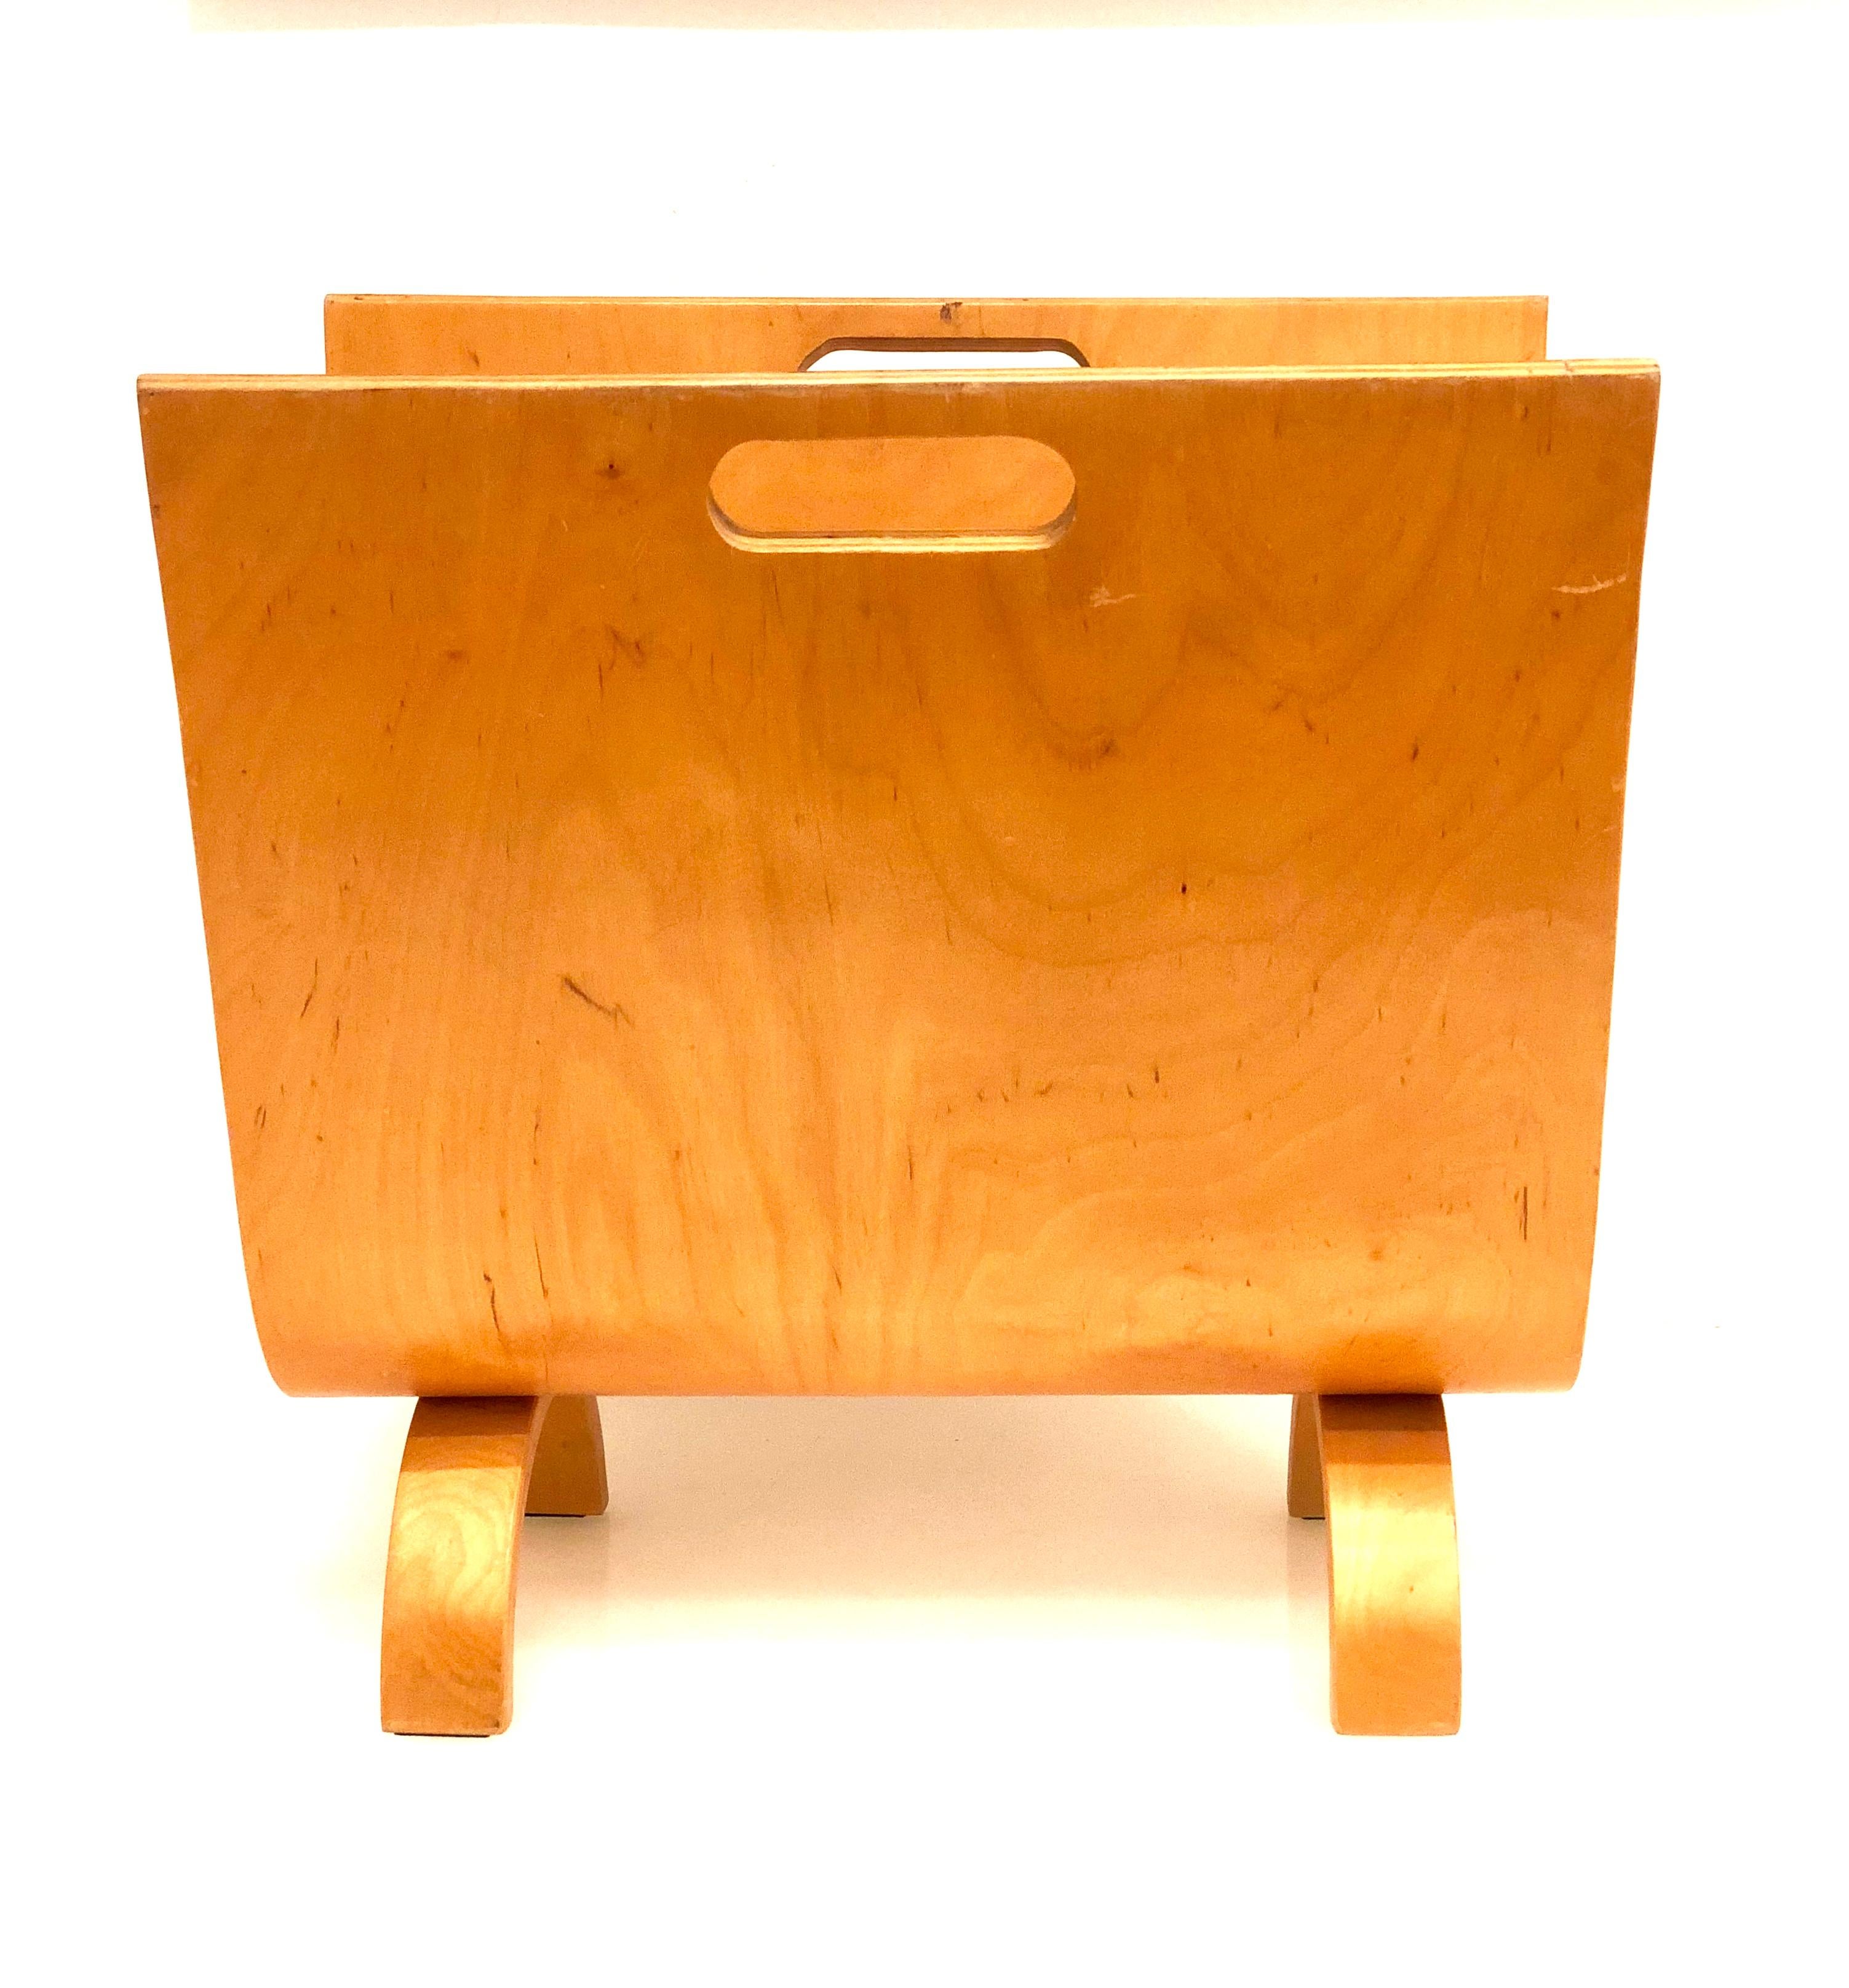 Simple and great design on this bent plywood magazine rack, after Alvar Aalto, all original finish very practical.